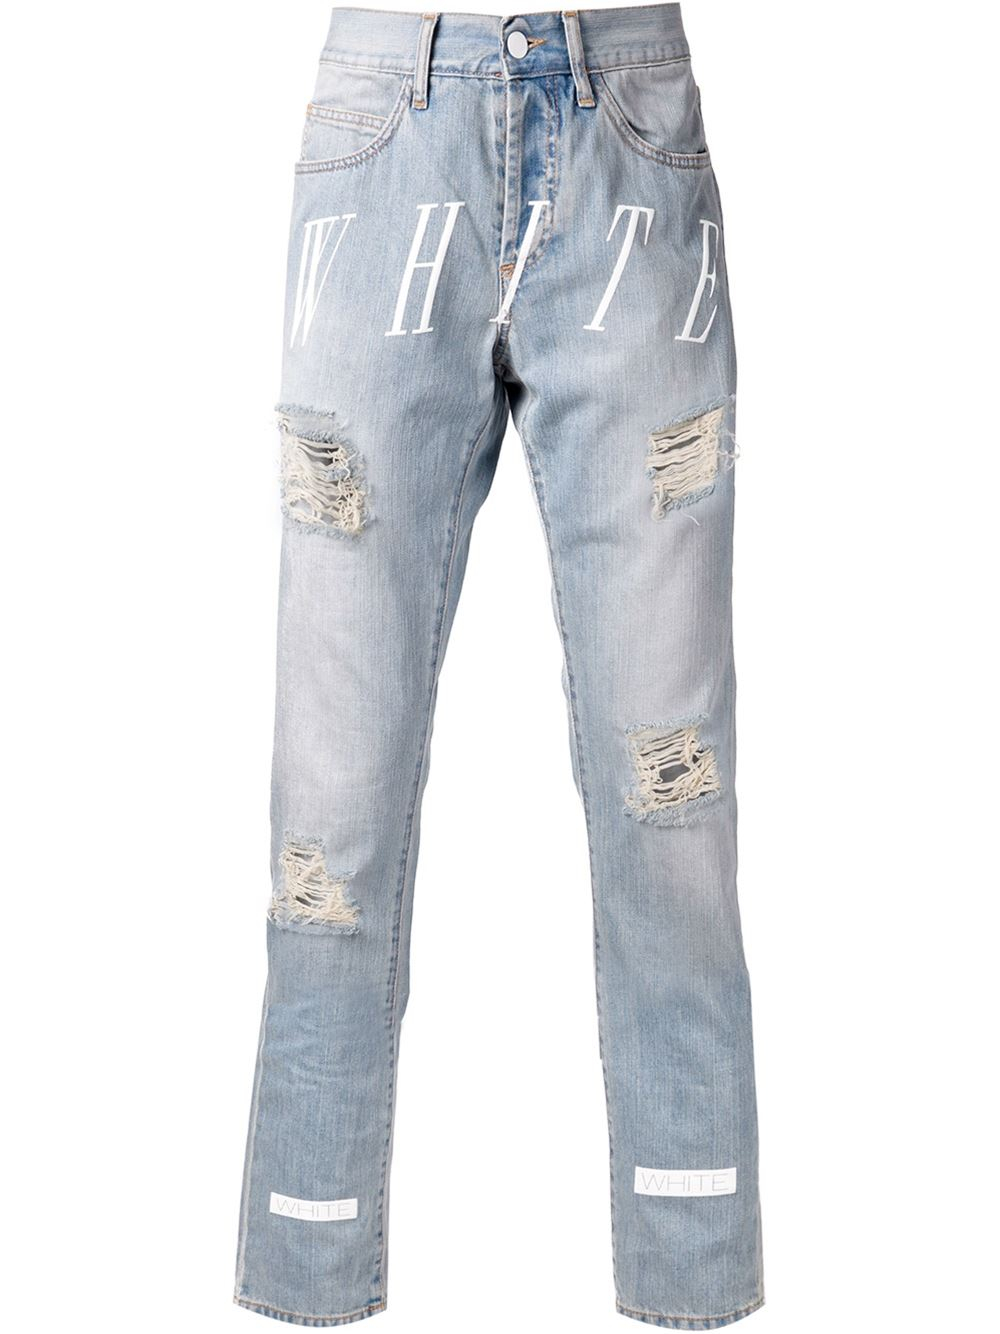 Off-White c/o Virgil Abloh Distressed Striped Jeans in Blue for Men - Lyst